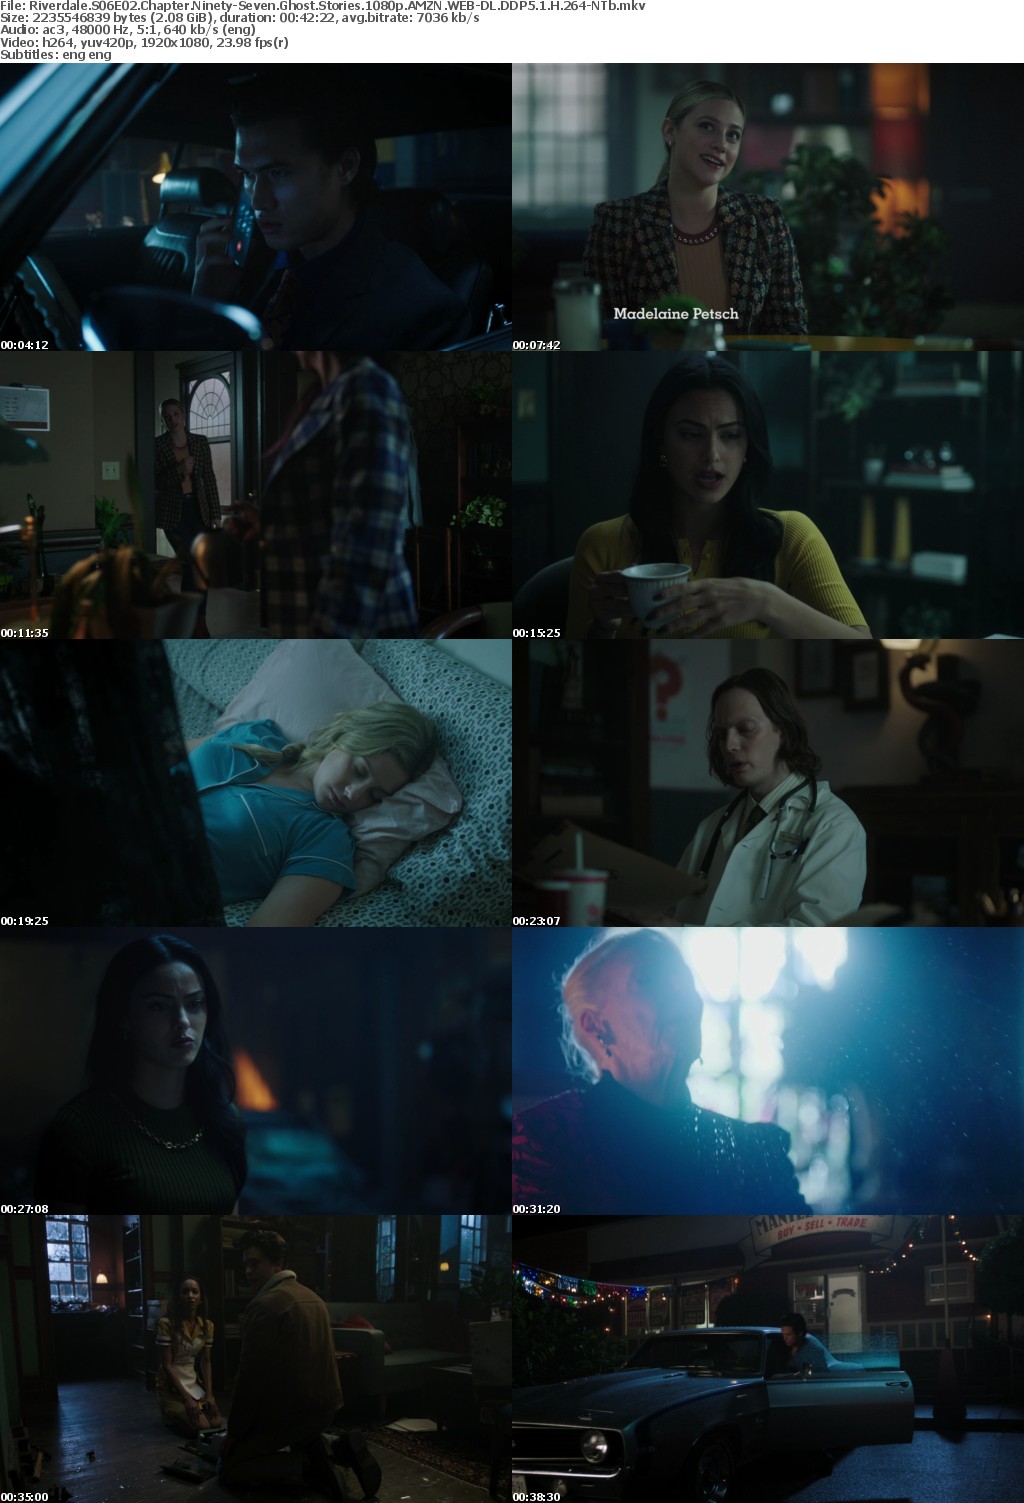 Riverdale US S06E02 Chapter Ninety-Seven Ghost Stories 1080p AMZN WEBRip DDP5 1 x264-NTb